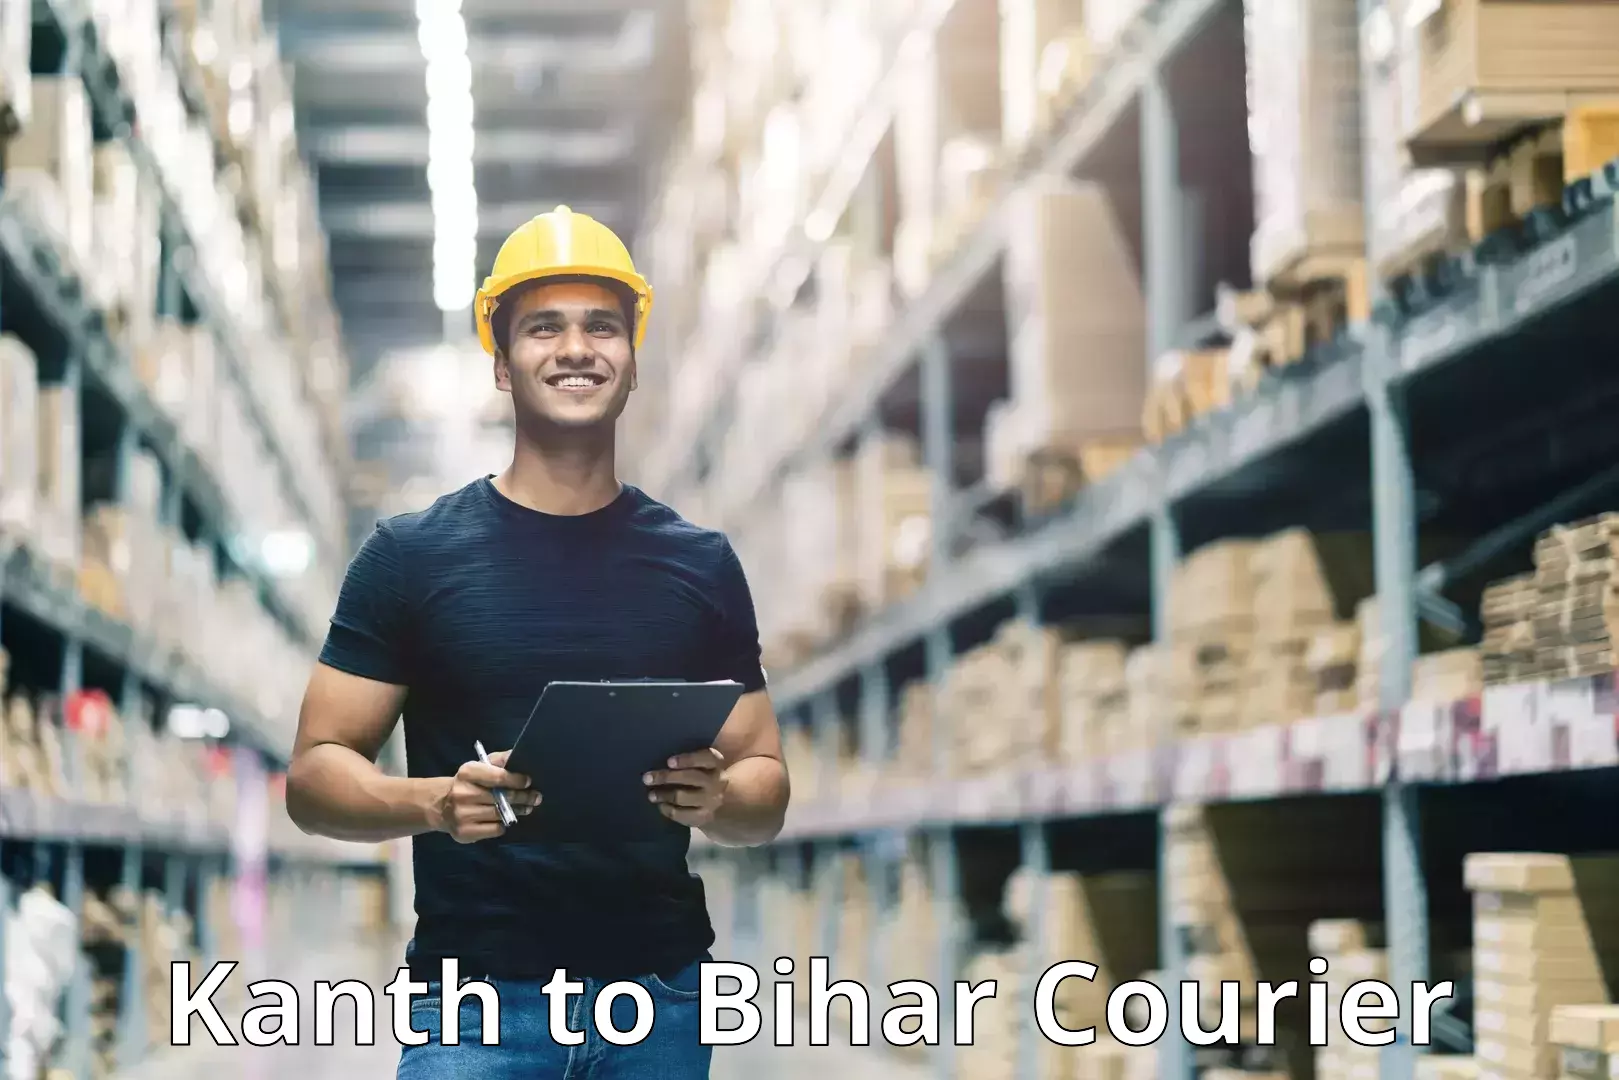 User-friendly courier app Kanth to Bakhri